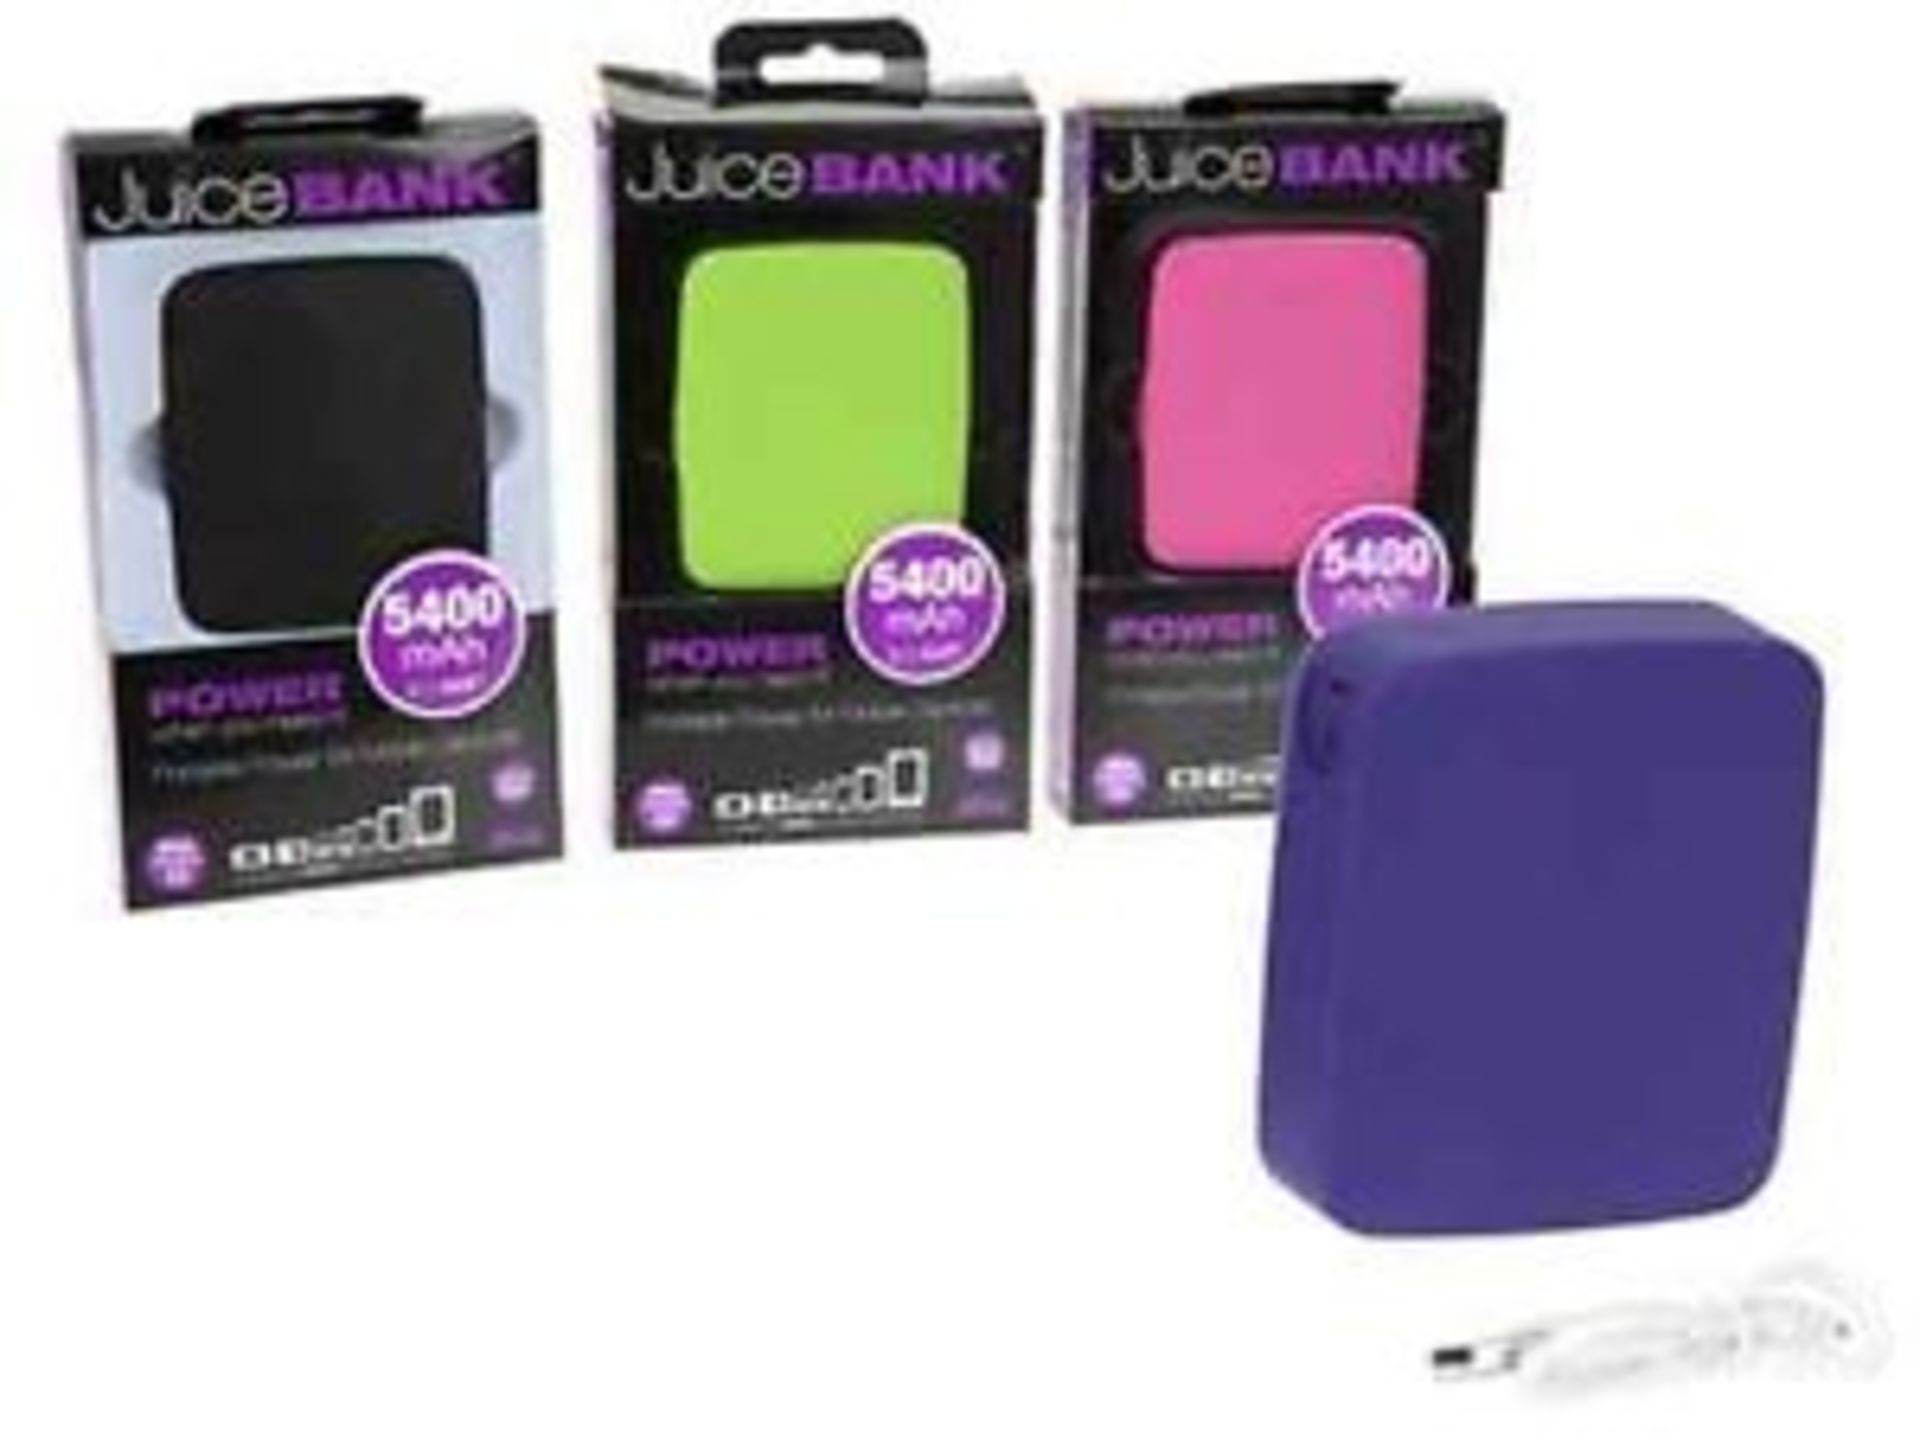 V Brand New Juice Bank 5400mAmp portable Power For Mobile Devices With Built In Torch - Colour May